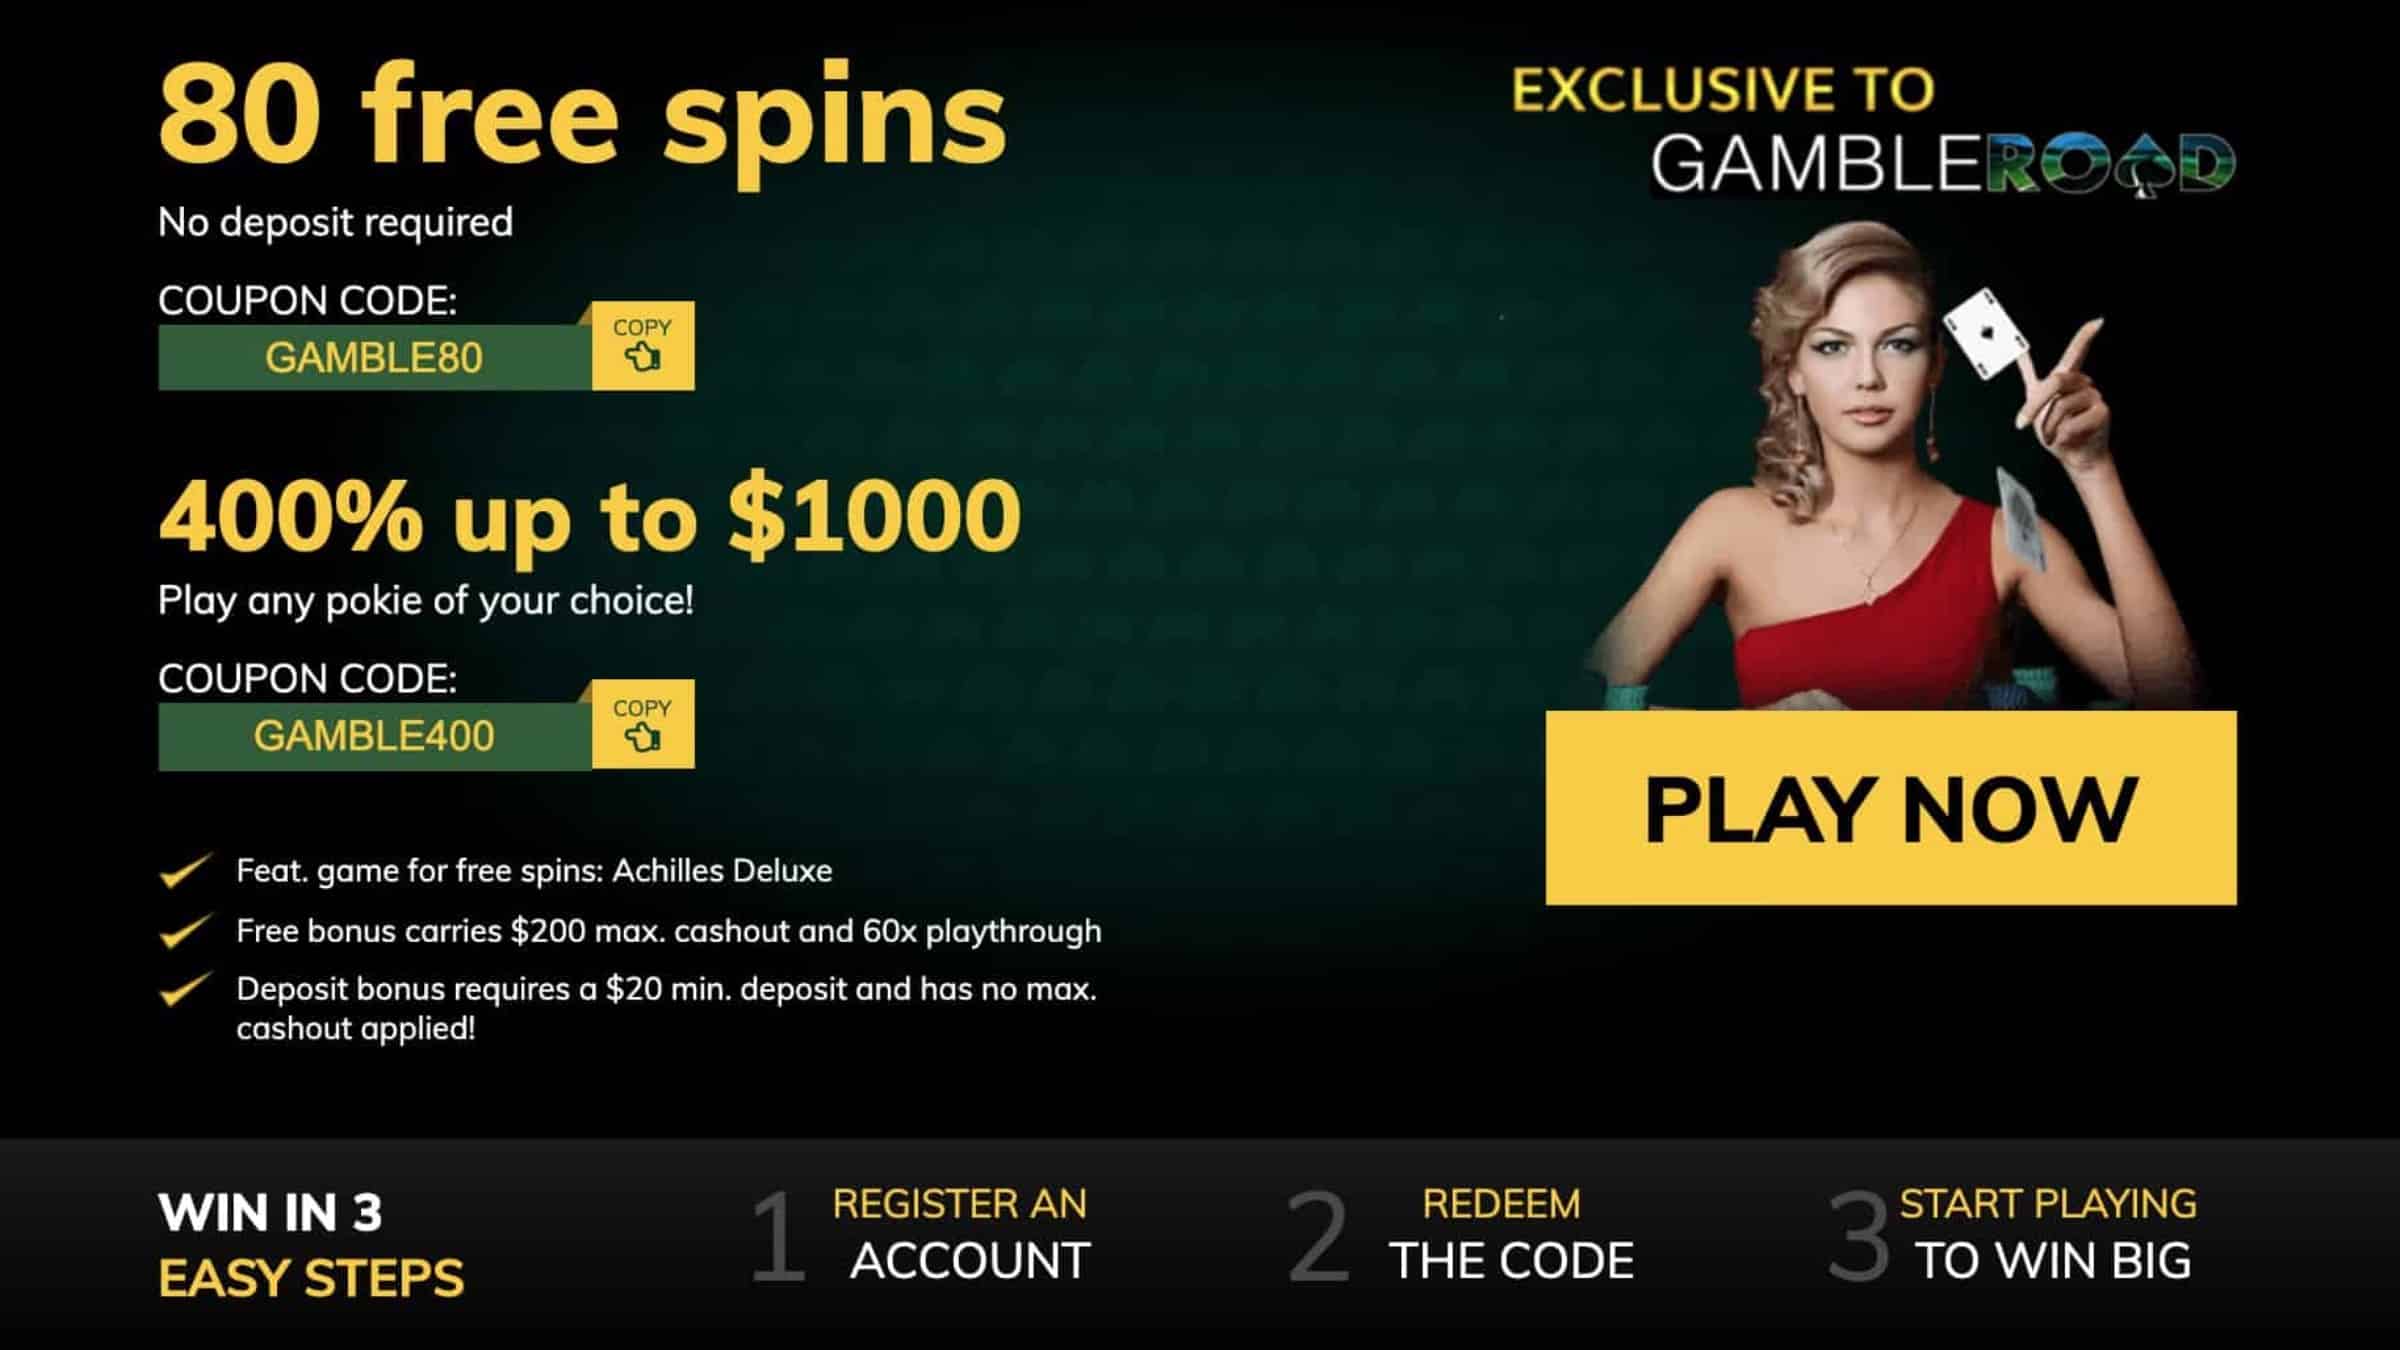 7 Sultans Casino Free Spins